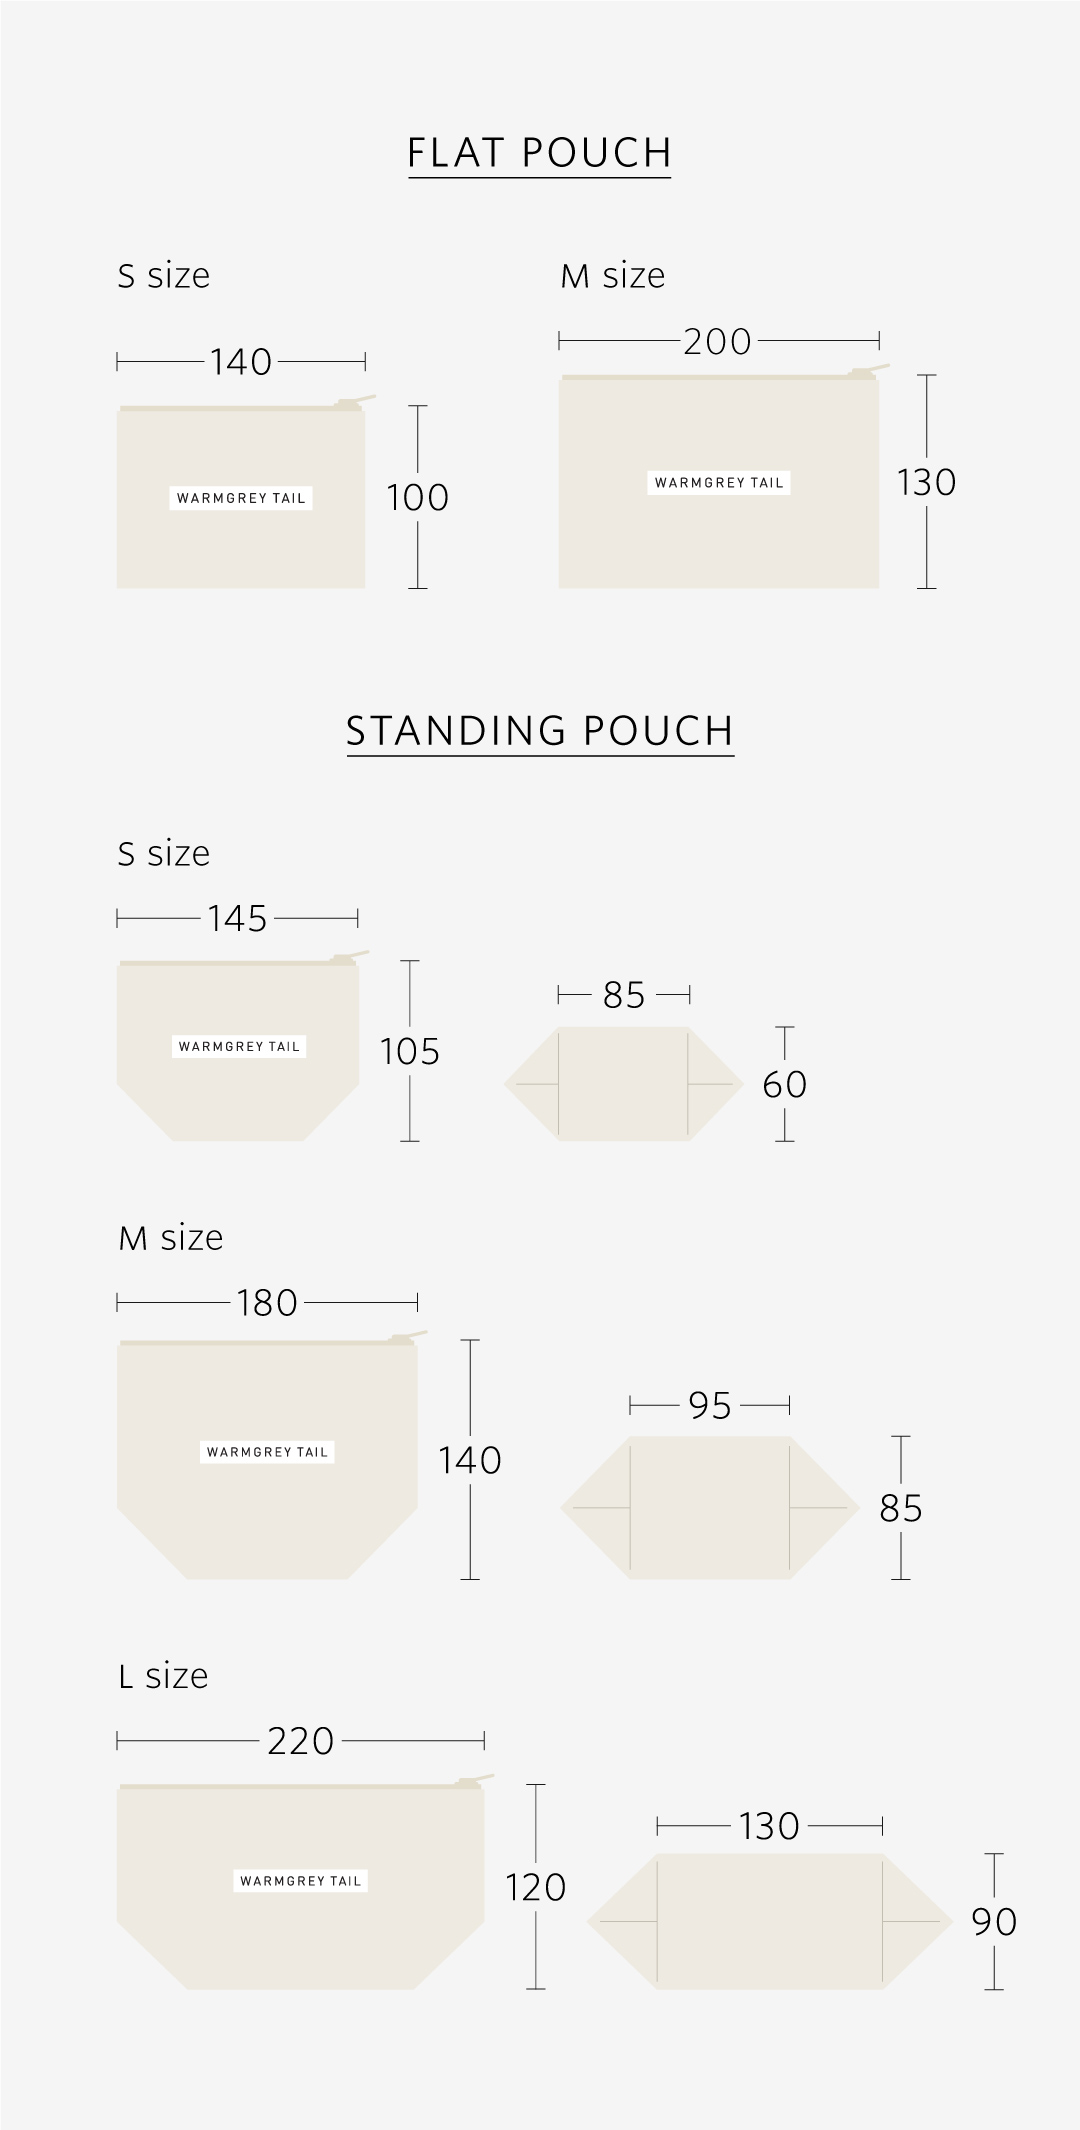 pouch-size-image_133025.jpg